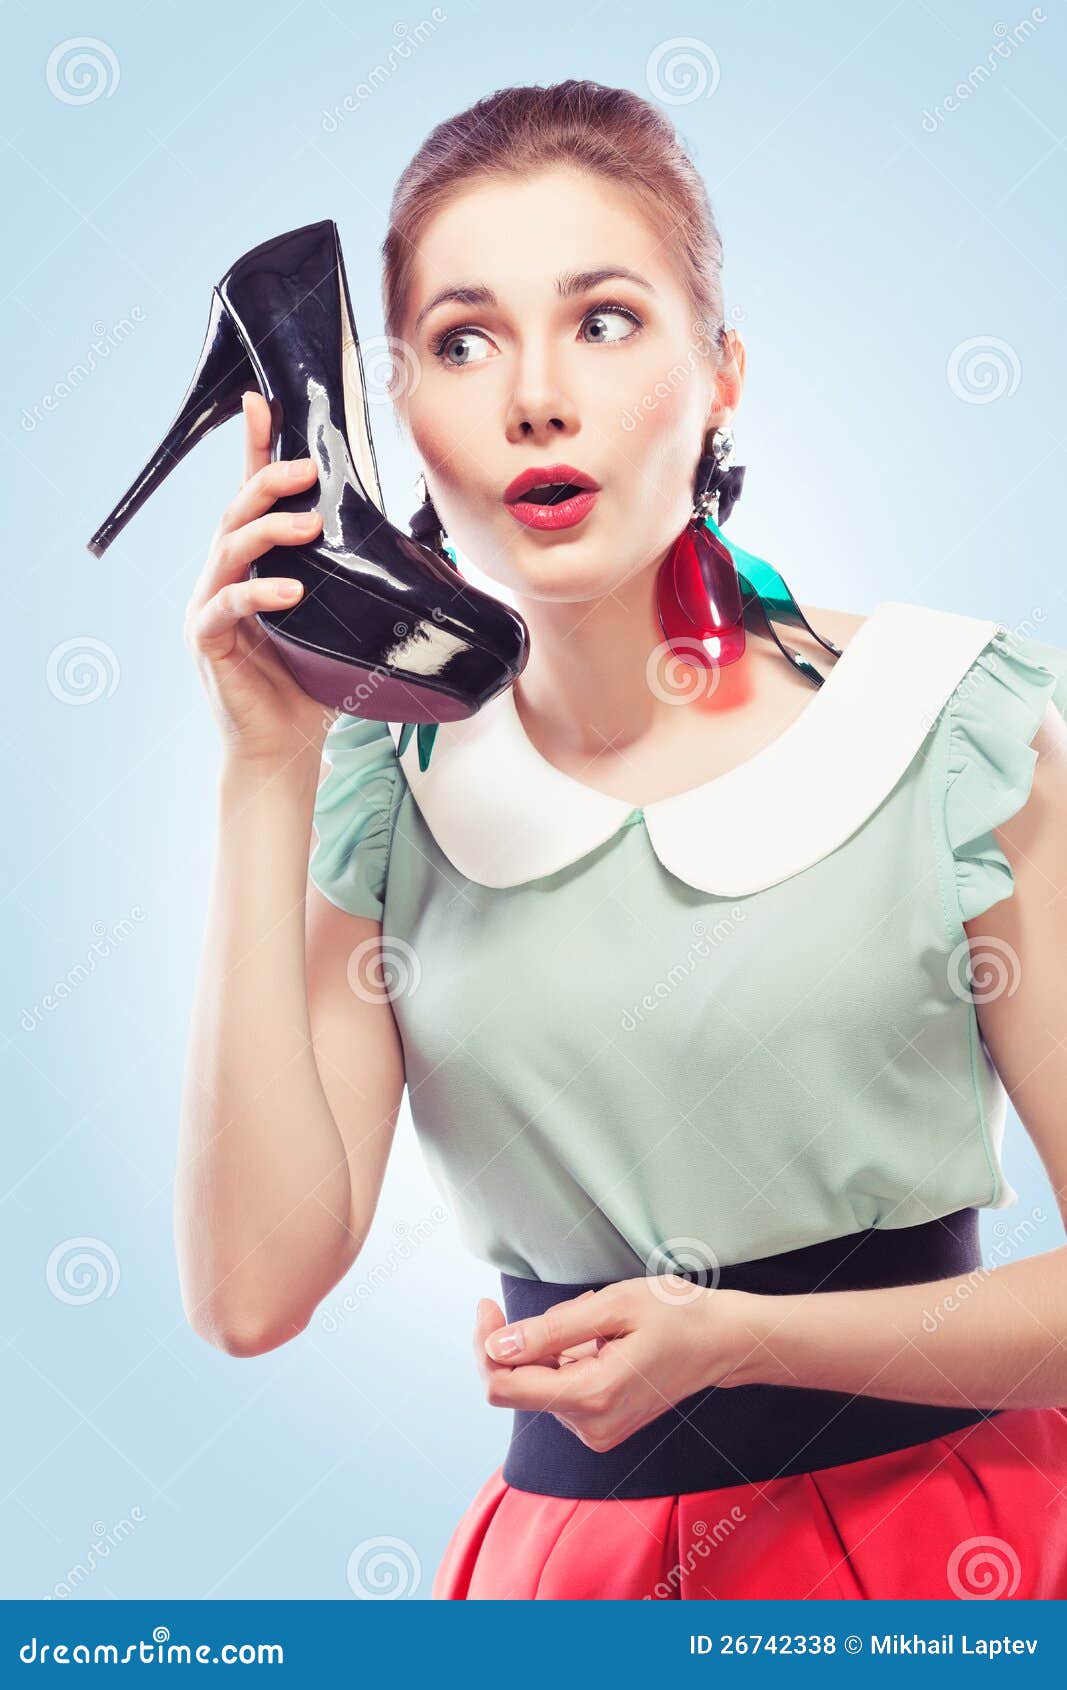 Girl Answering The Shoe Call Stock Photo - Image: 26742338